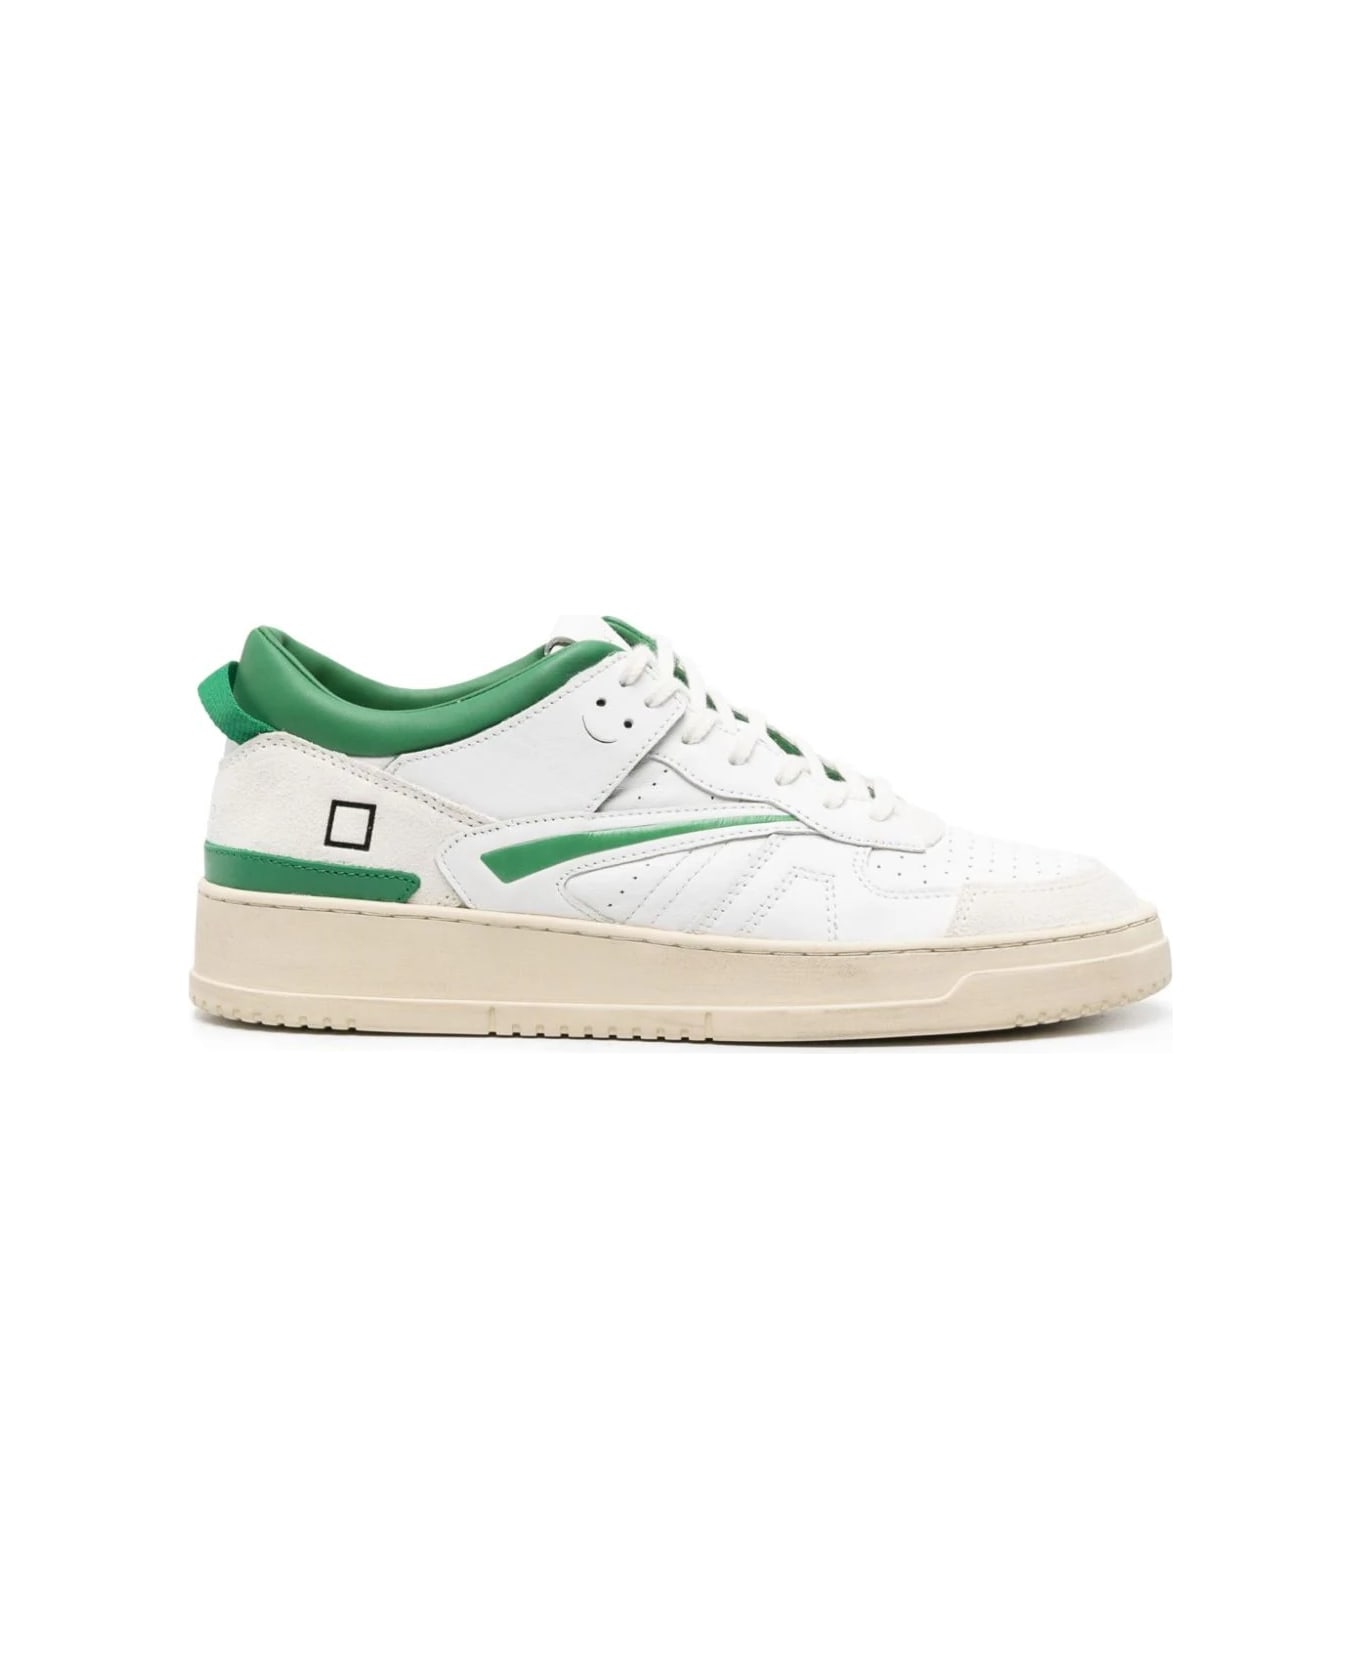 D.A.T.E. White And Green Torneo Sneakers - Green